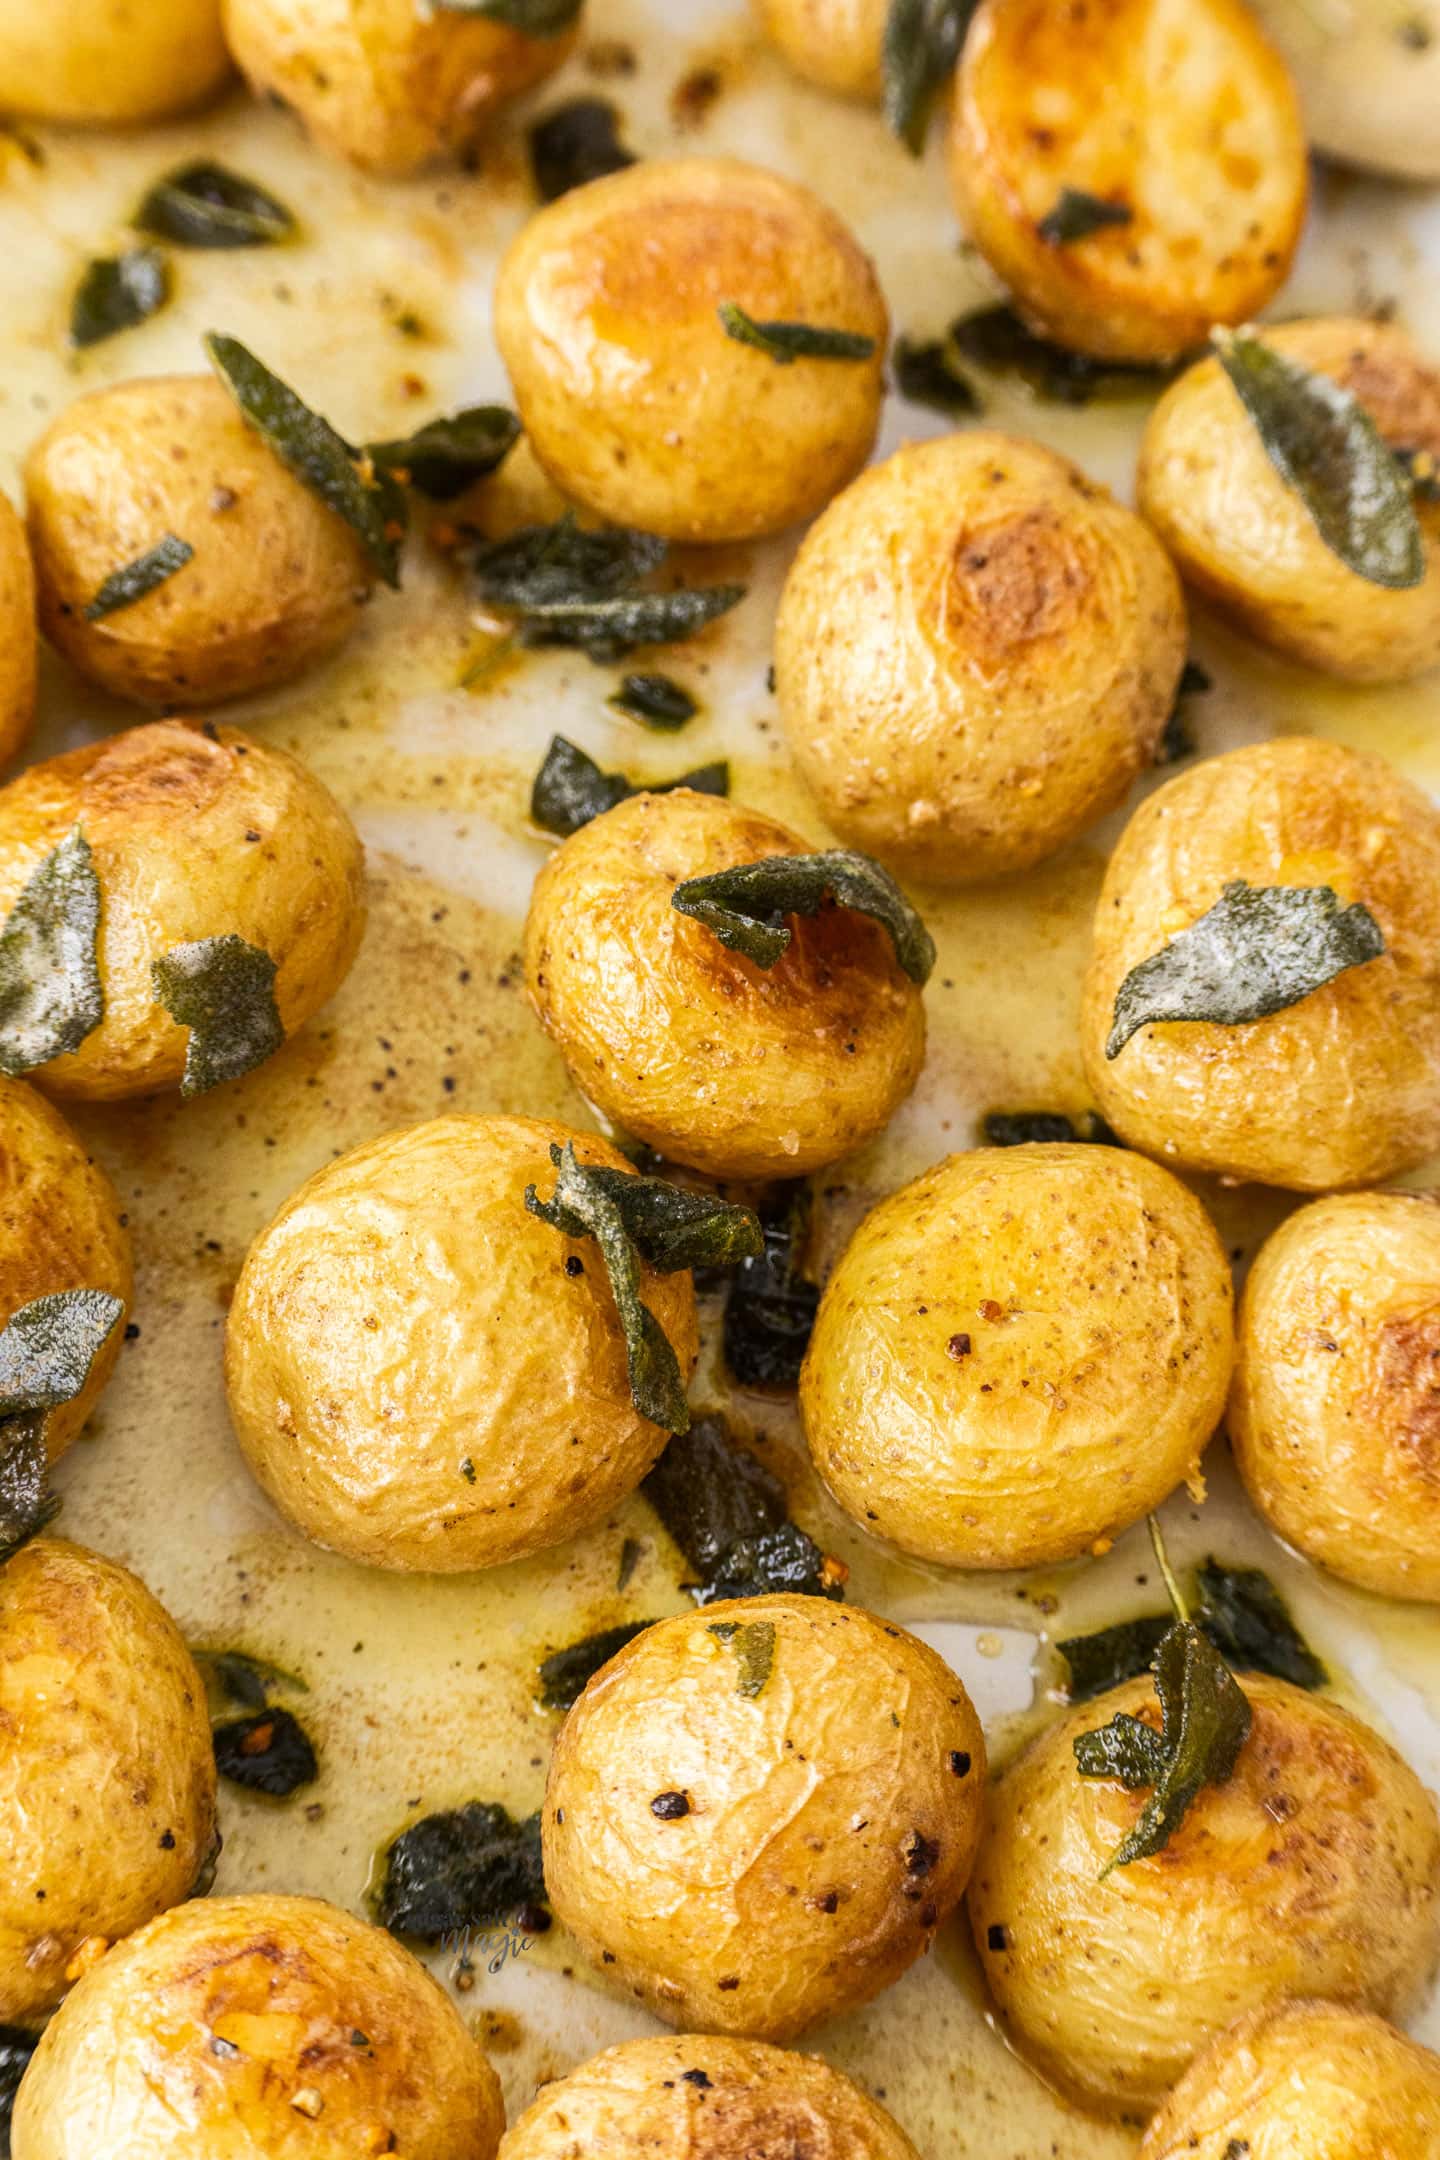 A batch of roasted potatoes dressed with sage butter.